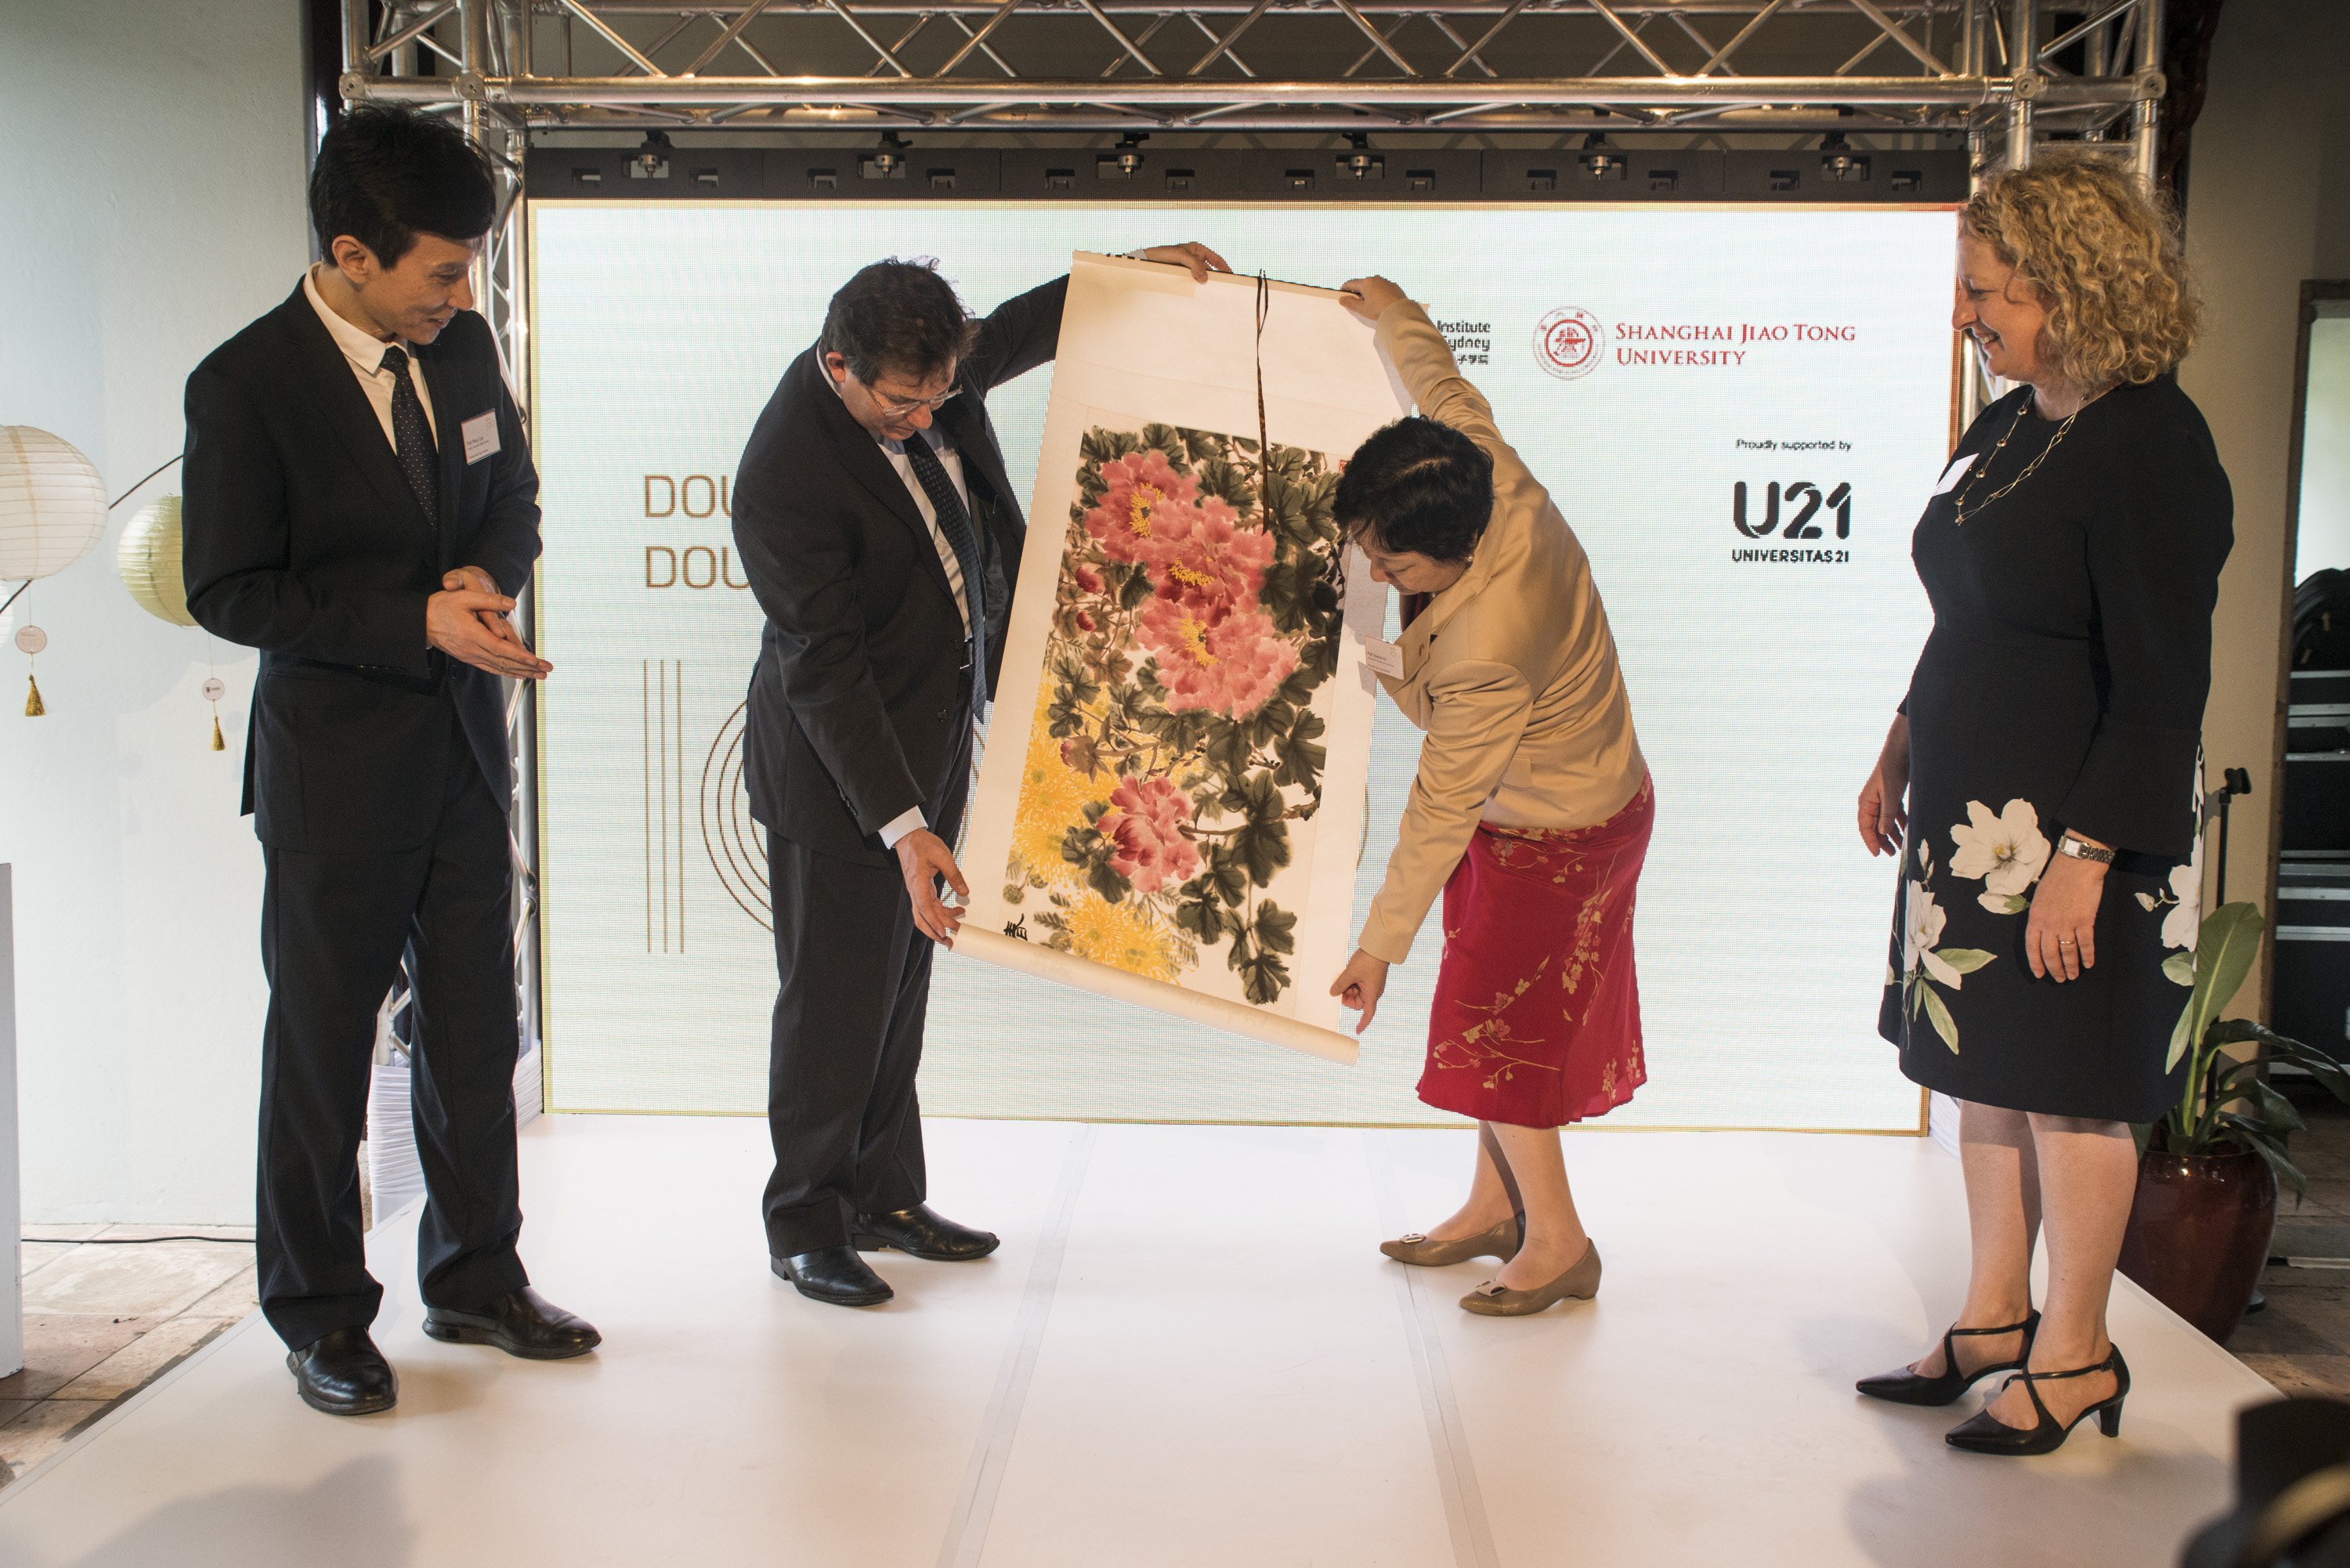 UNSW and SJTU: Sydney and Shanghai - U21 Knowledge Partners for the Future